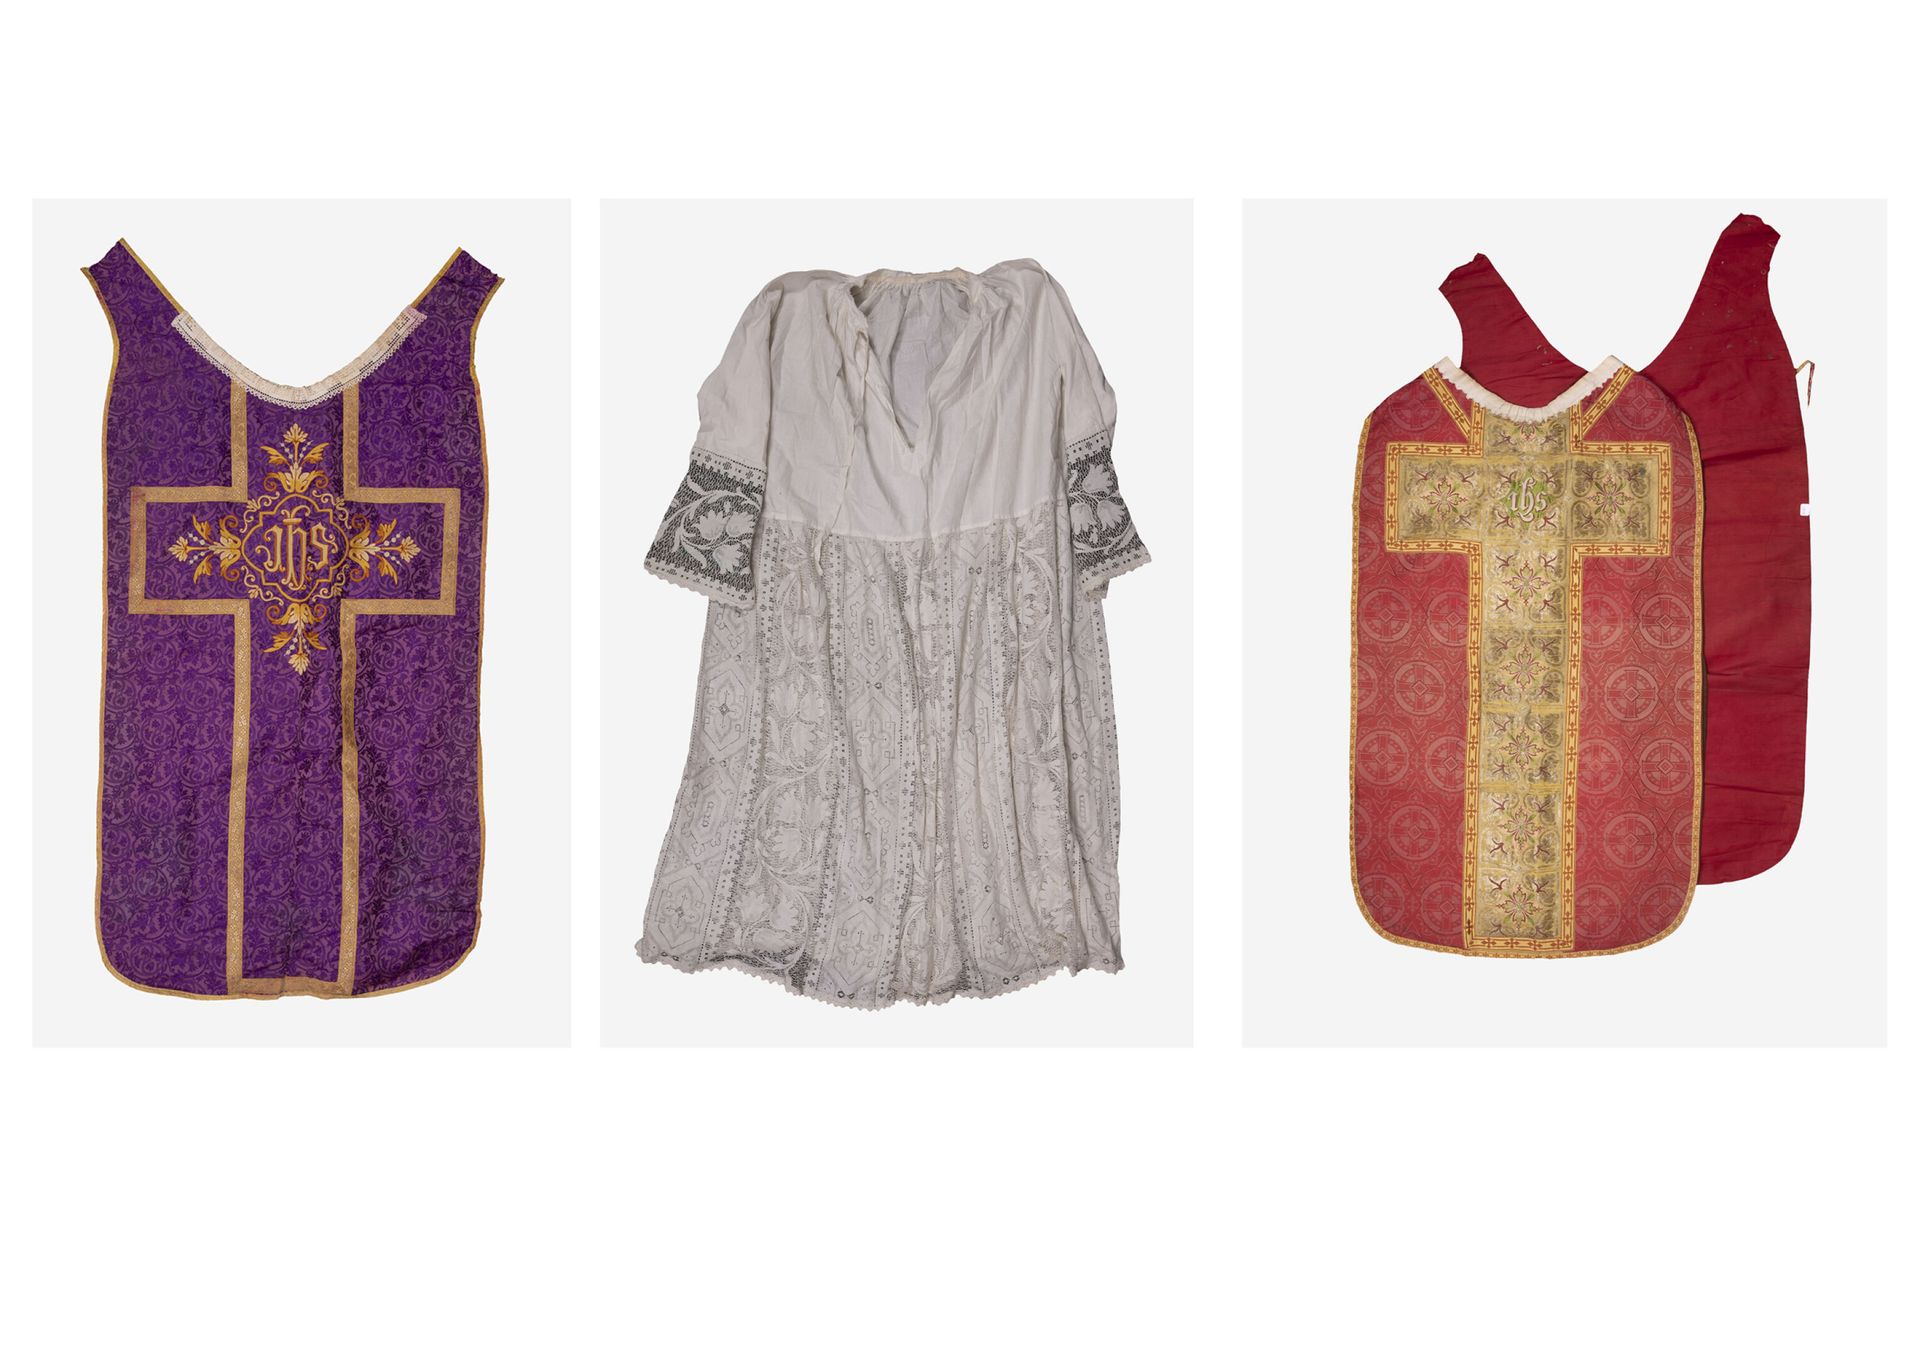 Vêtements liturgiques. - Polychrome chasuble with red background and yellow bord&hellip;